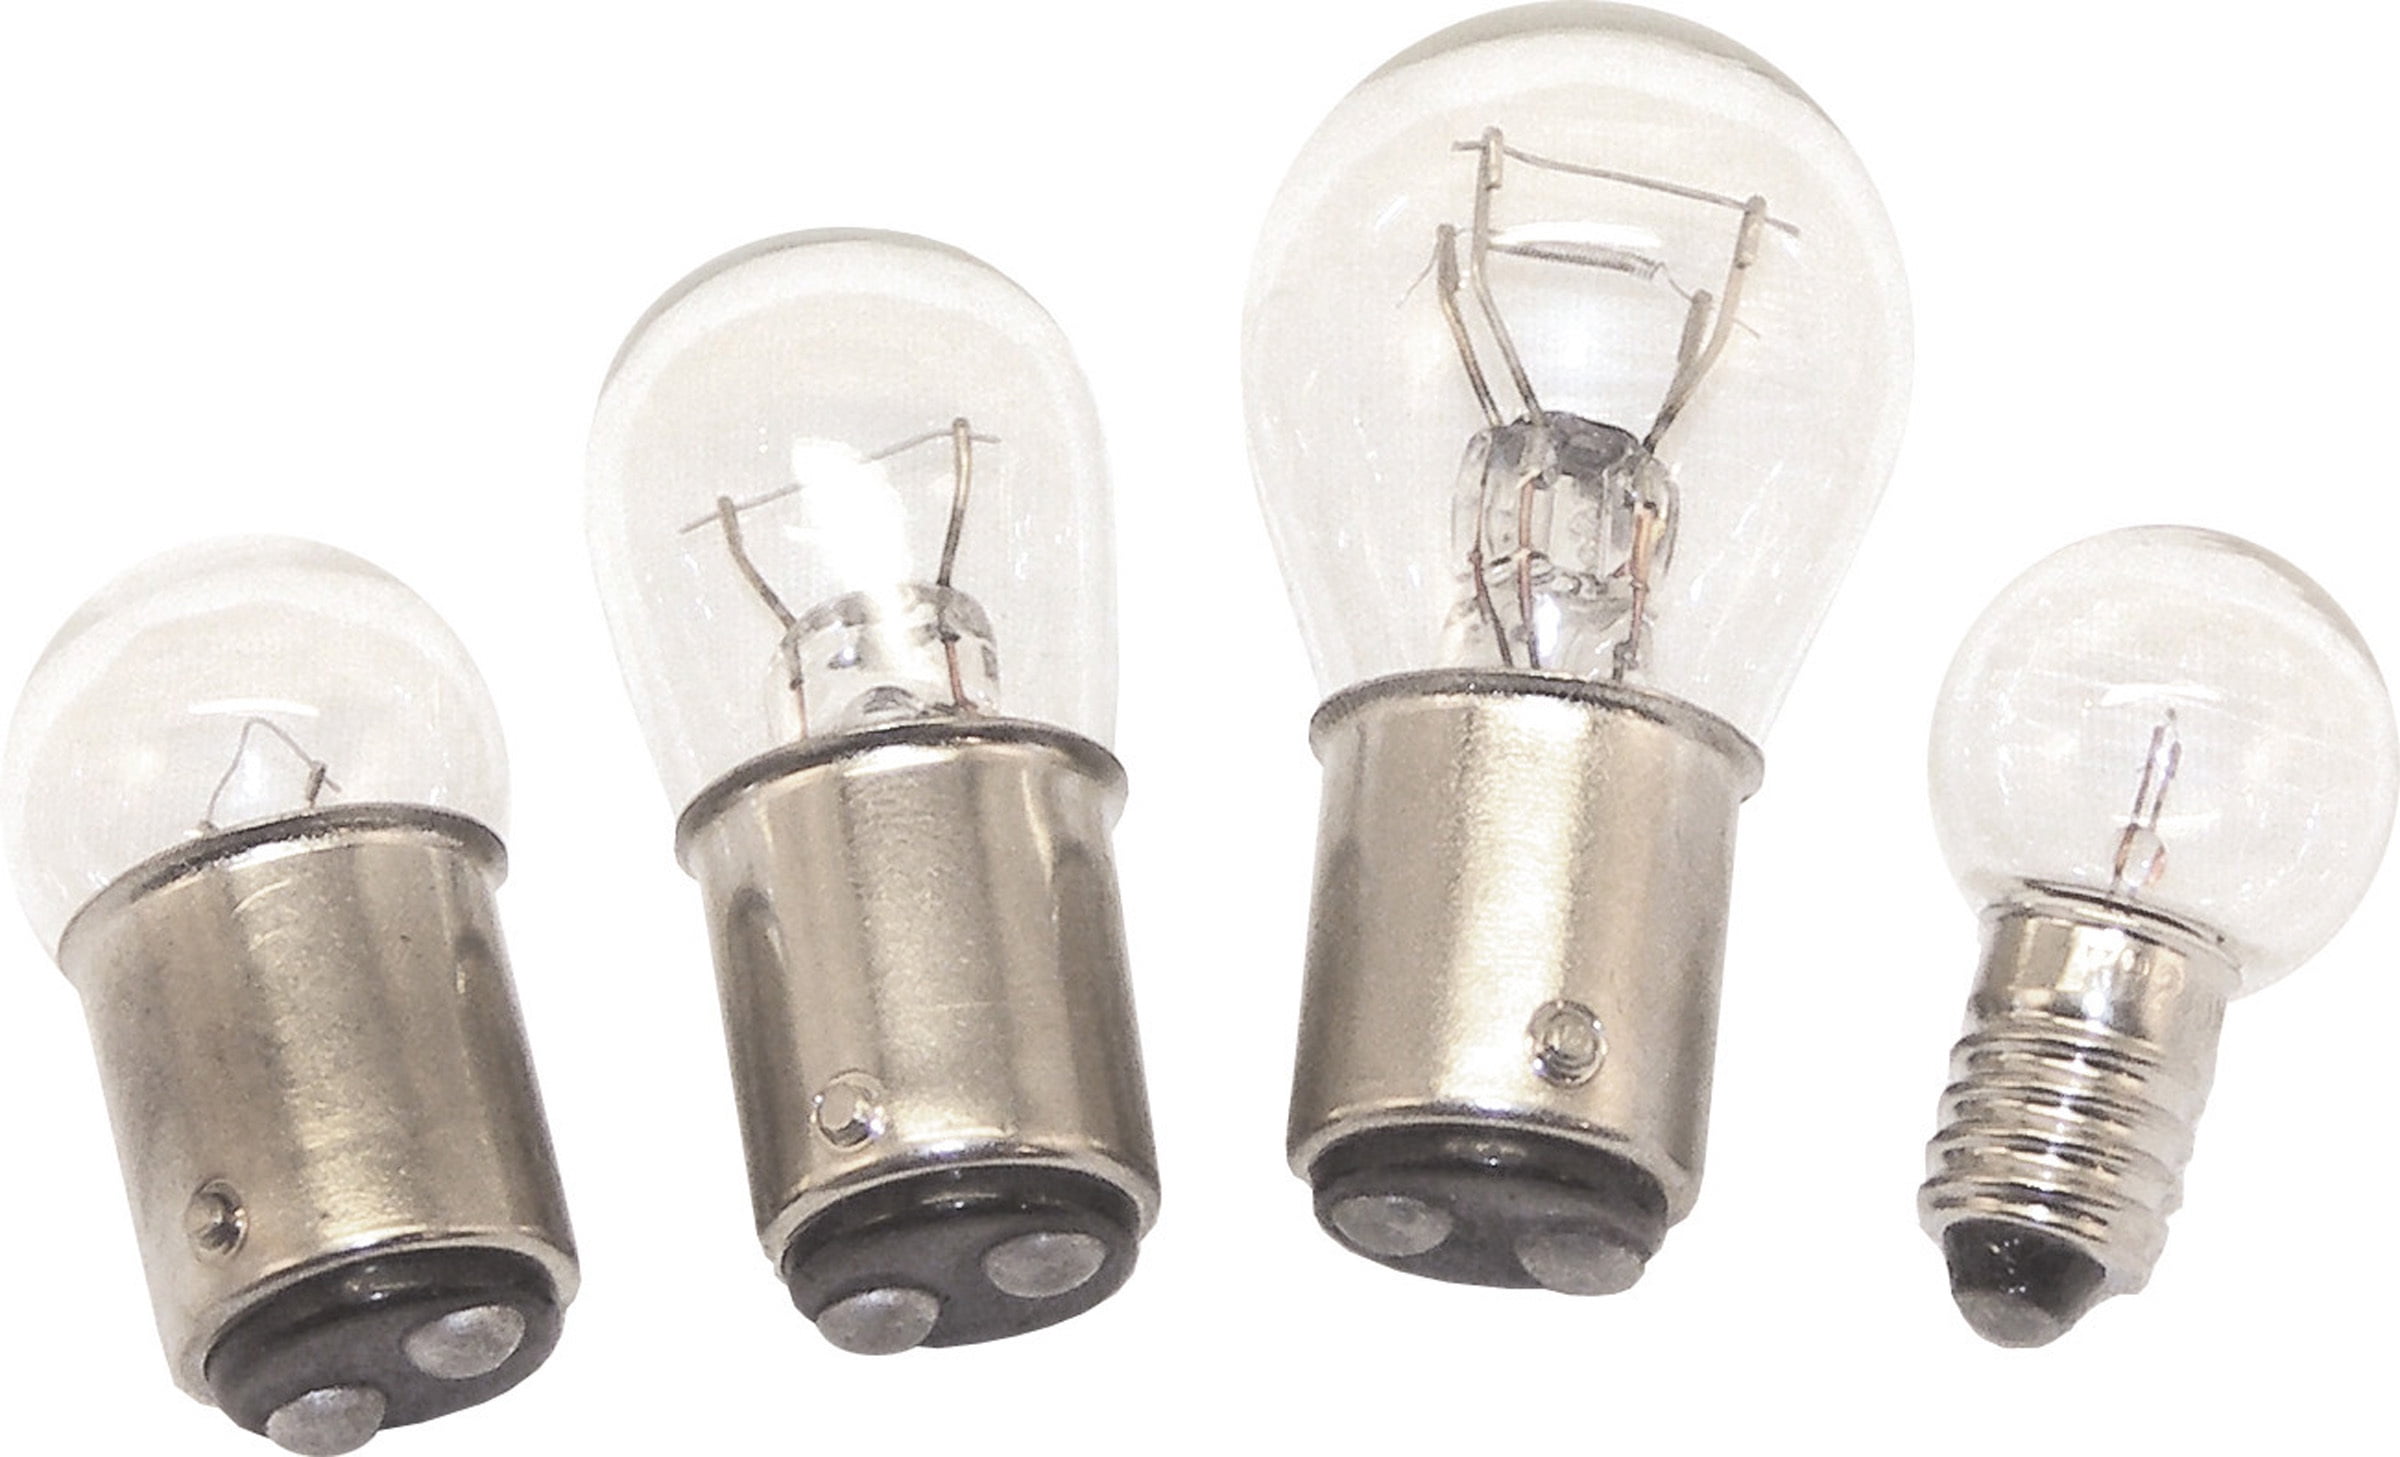 Details about  / Shoreline Marine LED Replacement Bulb One Size